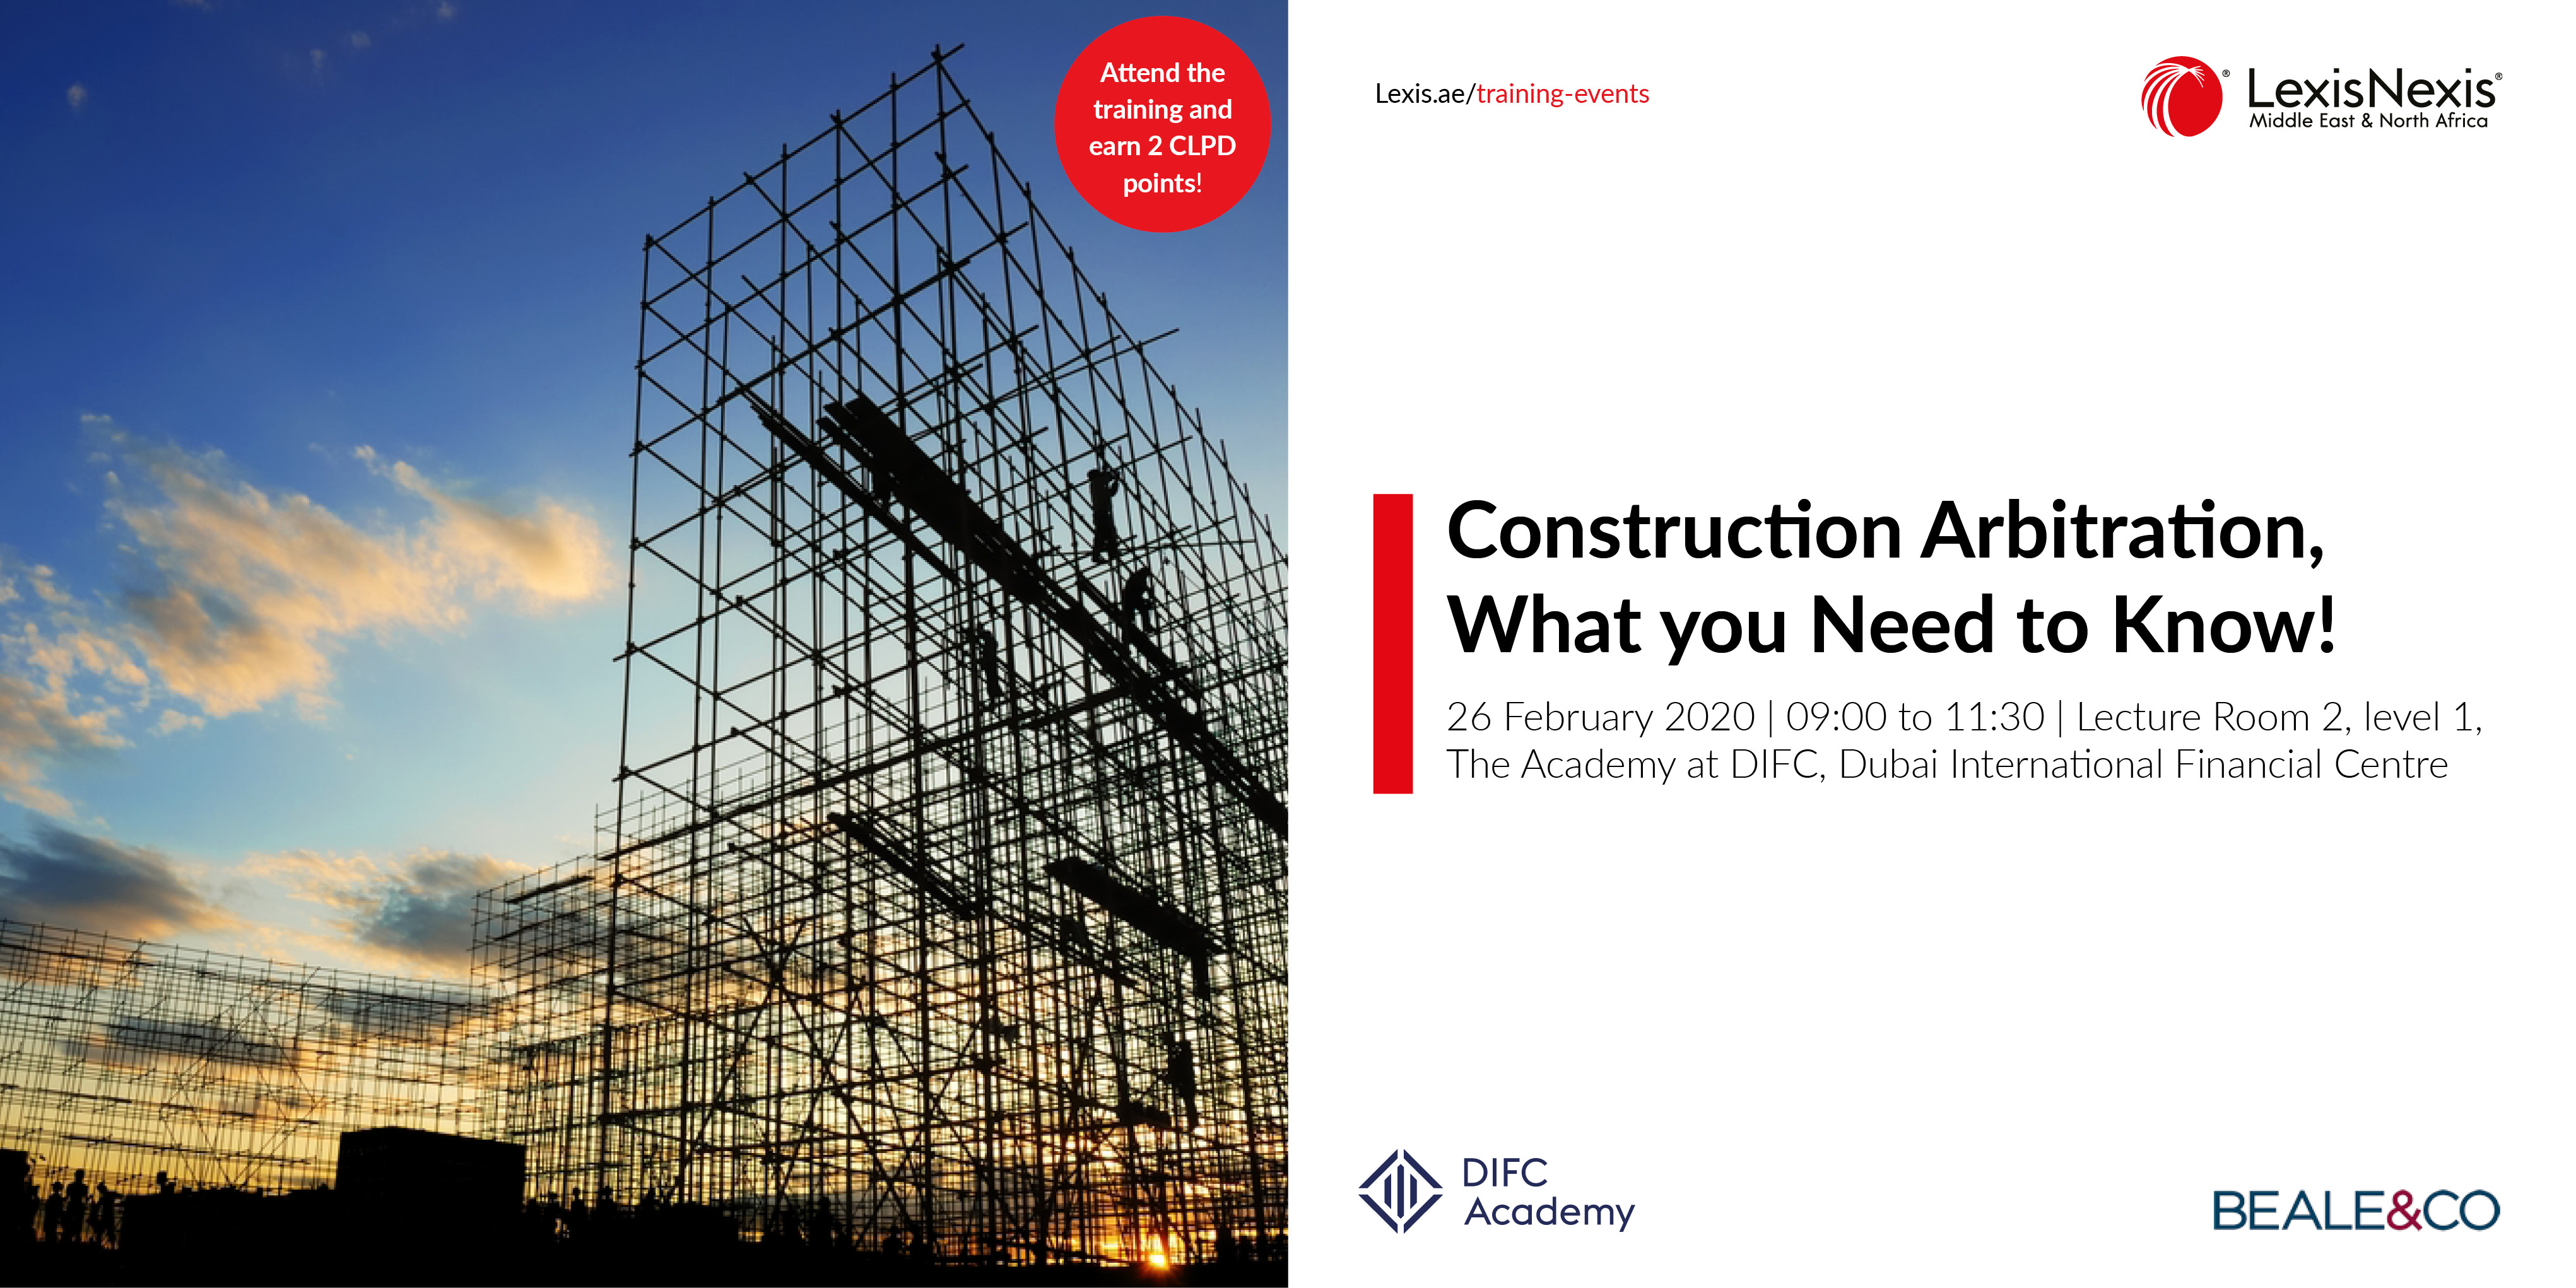 Construction Arbitration, What you need to know! | 26 February 2020, The Academy at DIFC